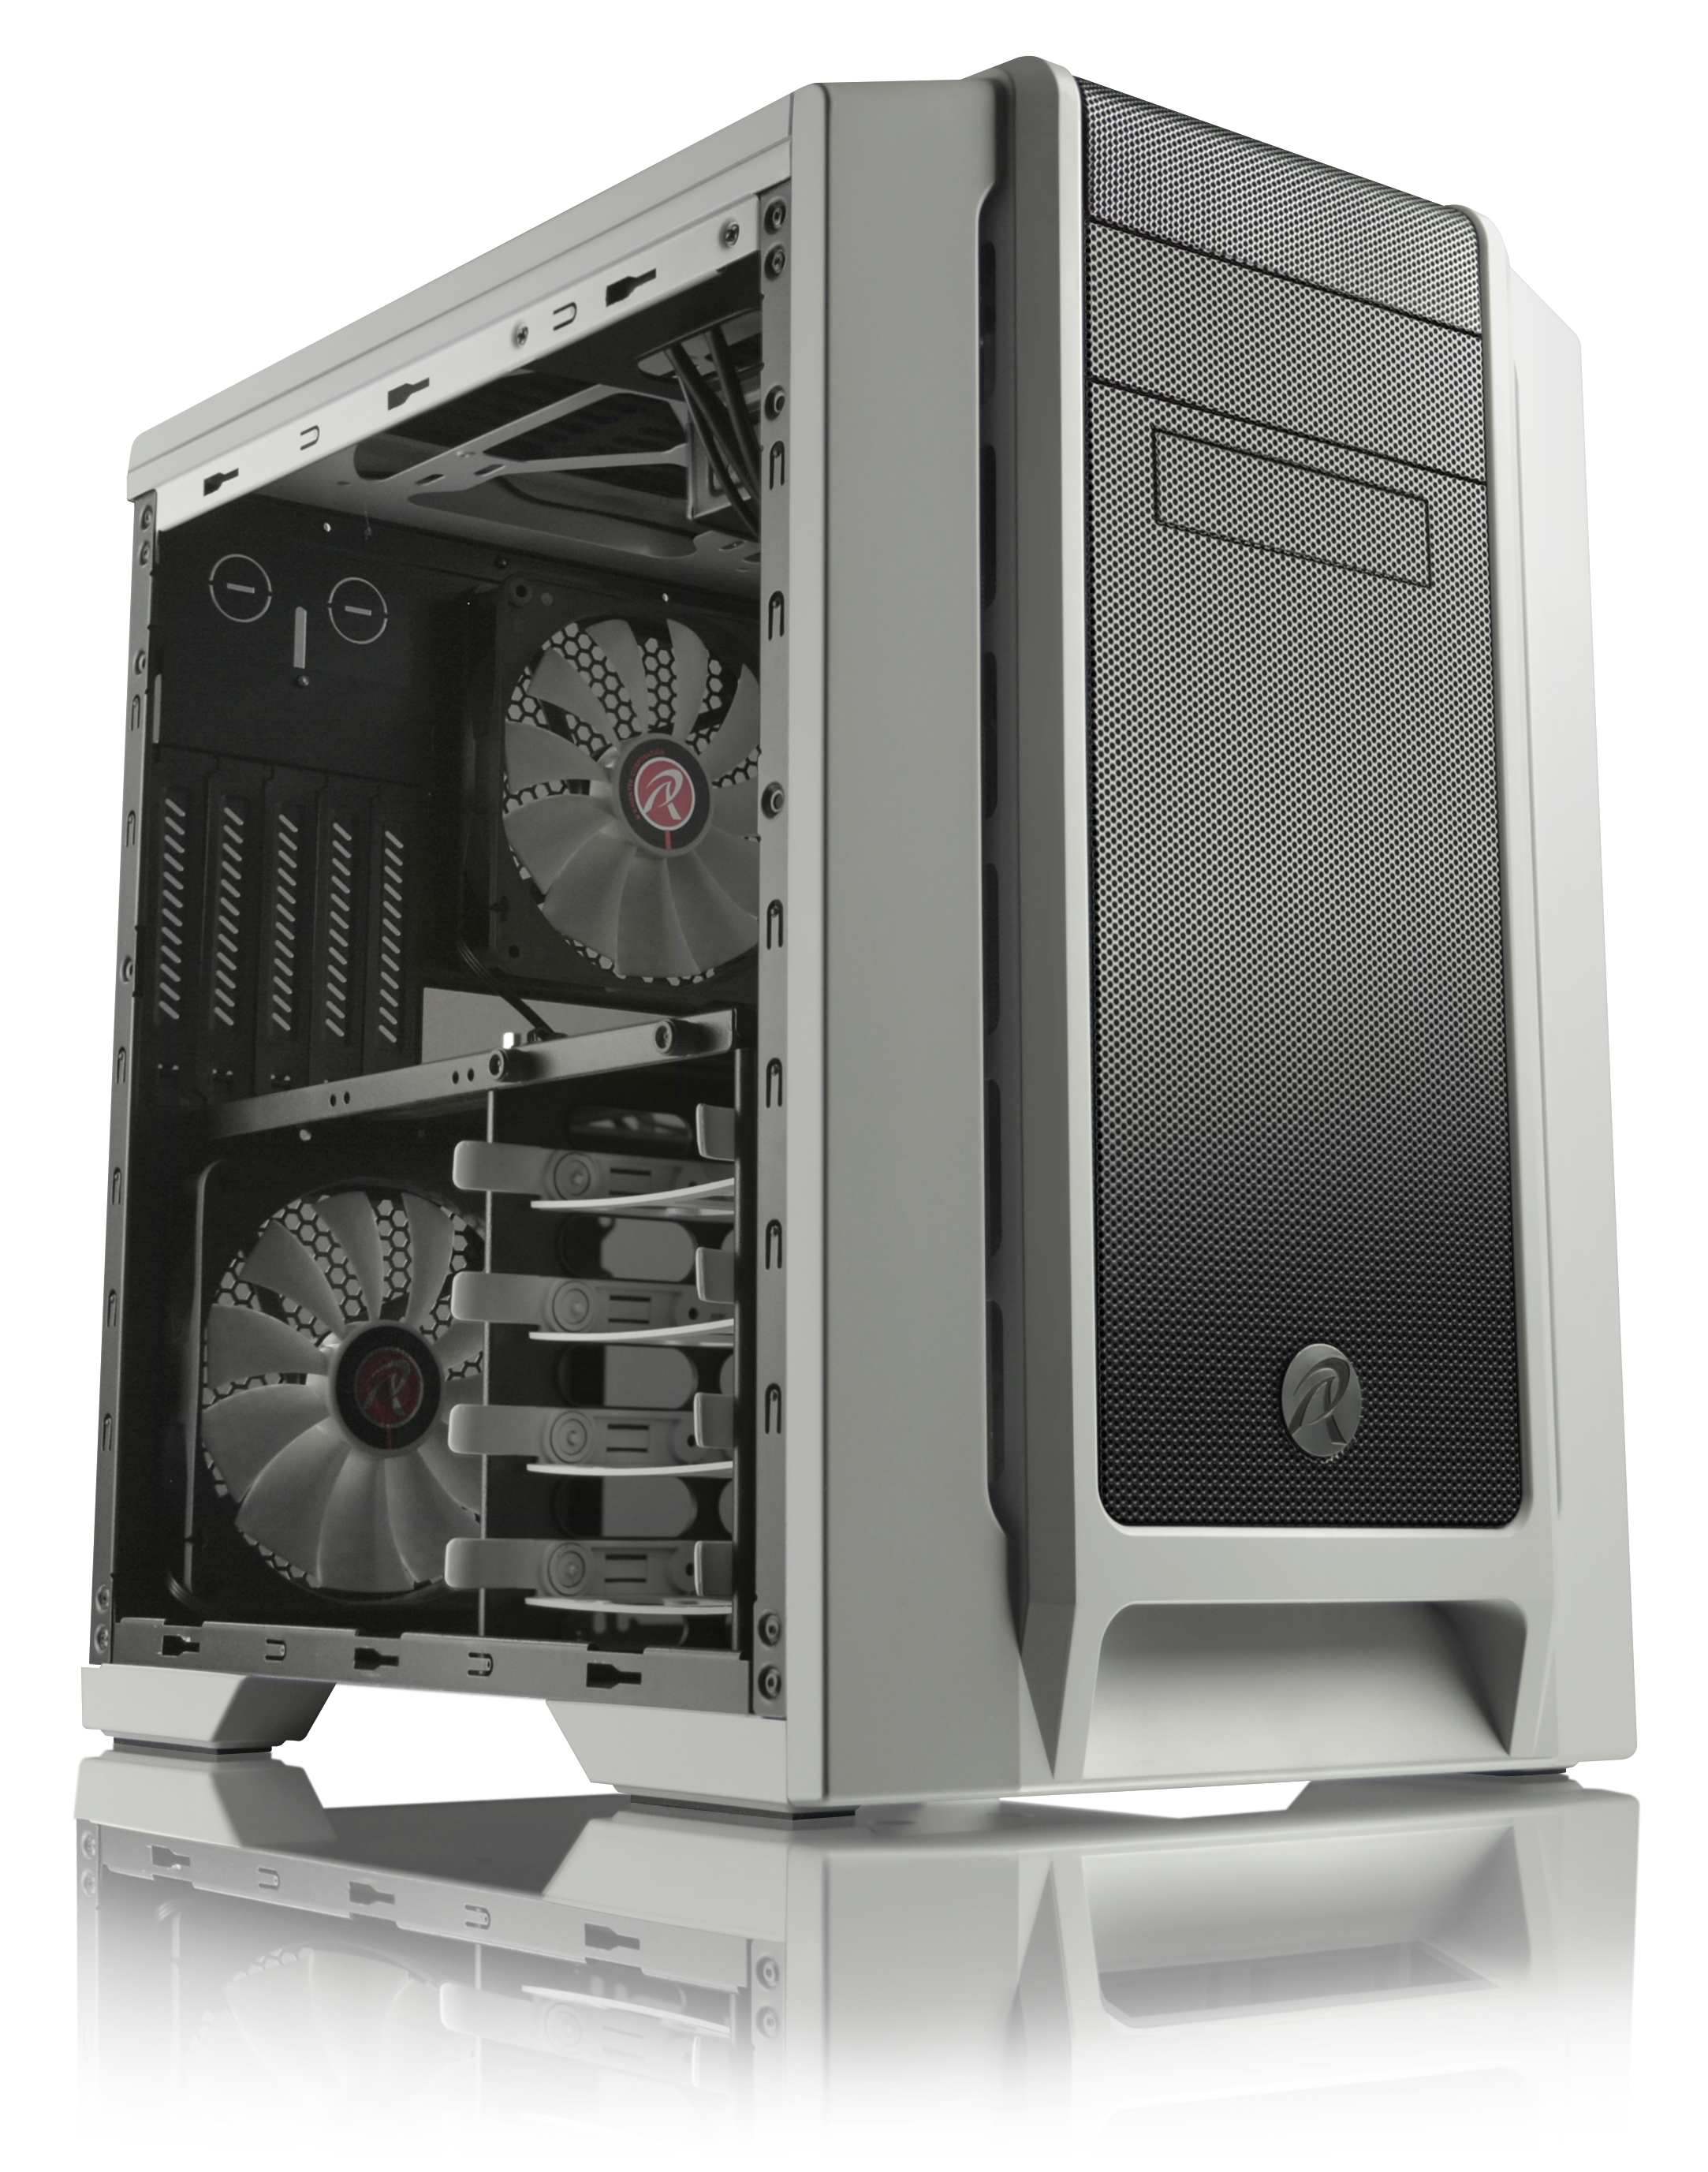 RAIJINTEK AENEAS Removable M/B Frame and Tool Free for ODD & HDD, Dust Control Filters, 14025*2 & 12025*2 Fans Preinstalled, 0.8mm SGCC   Support VGA Card up to 310mm and CPU Cooler Heigth up to 180mm